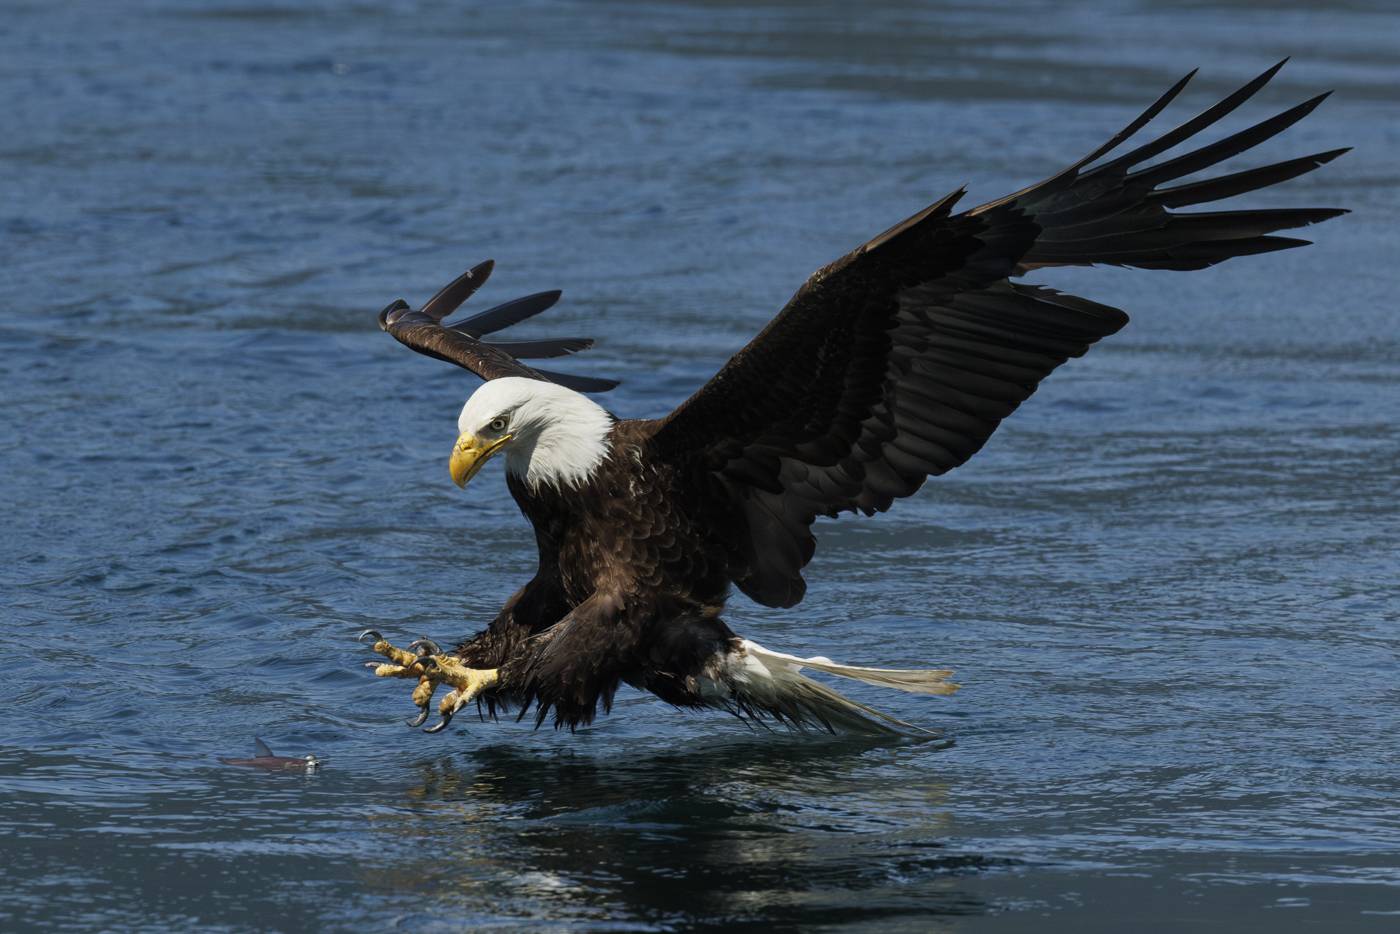 Bald eagle hovers over water.